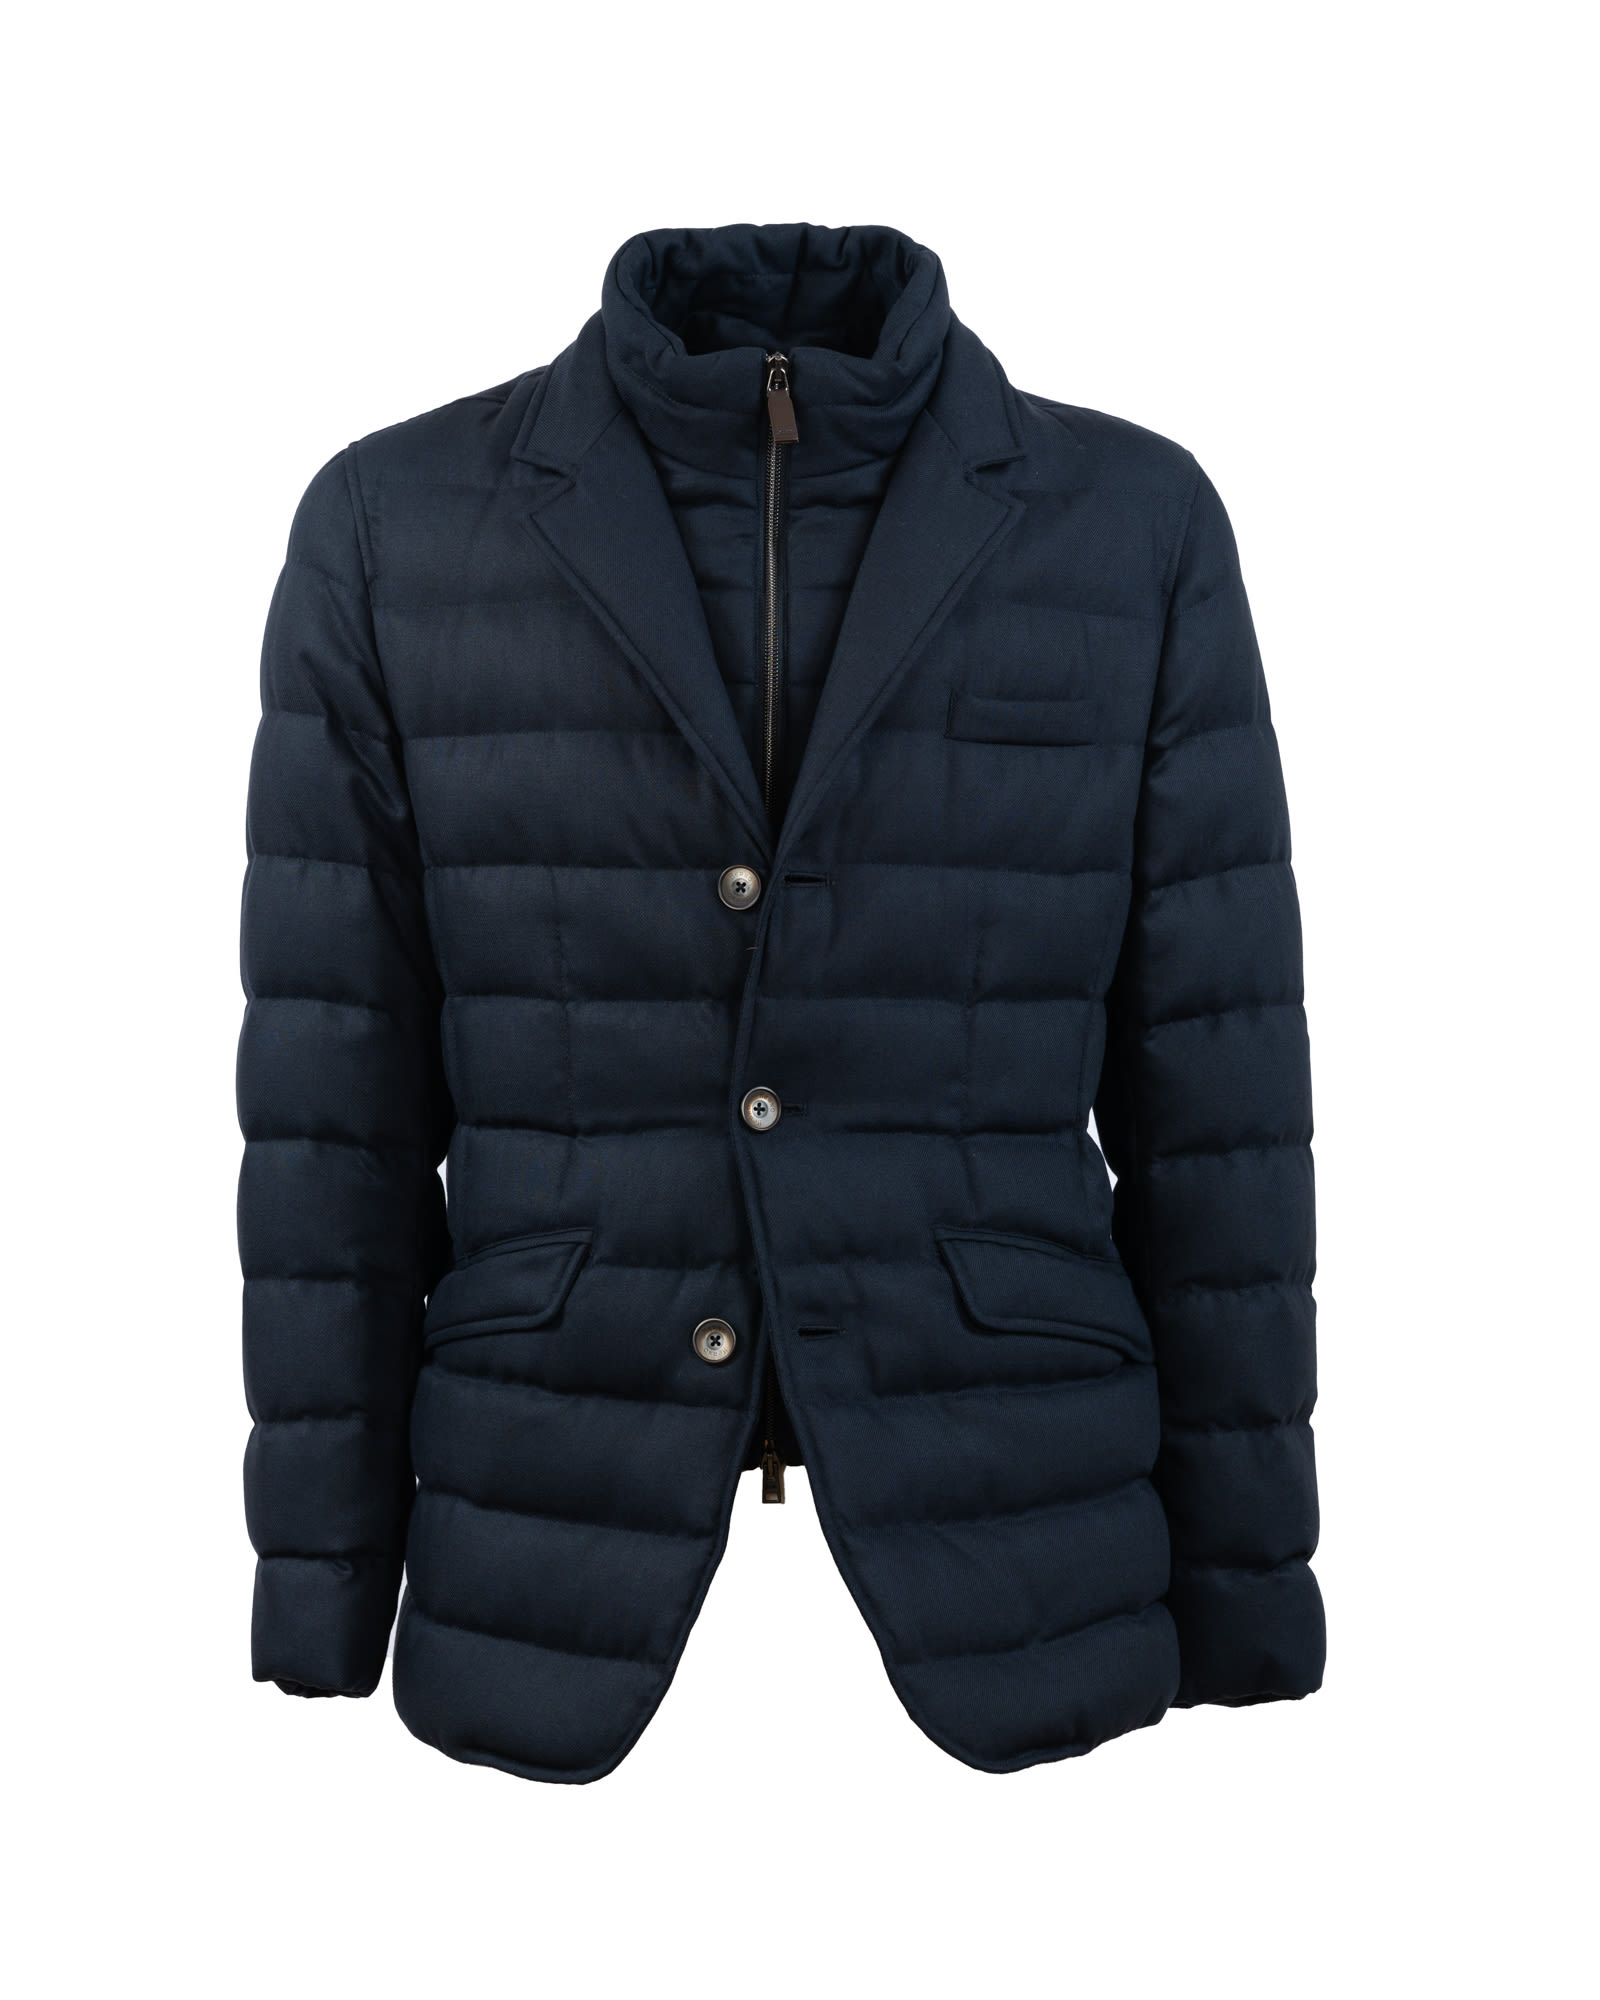 Herno Blazer down jacket made of technical fabric